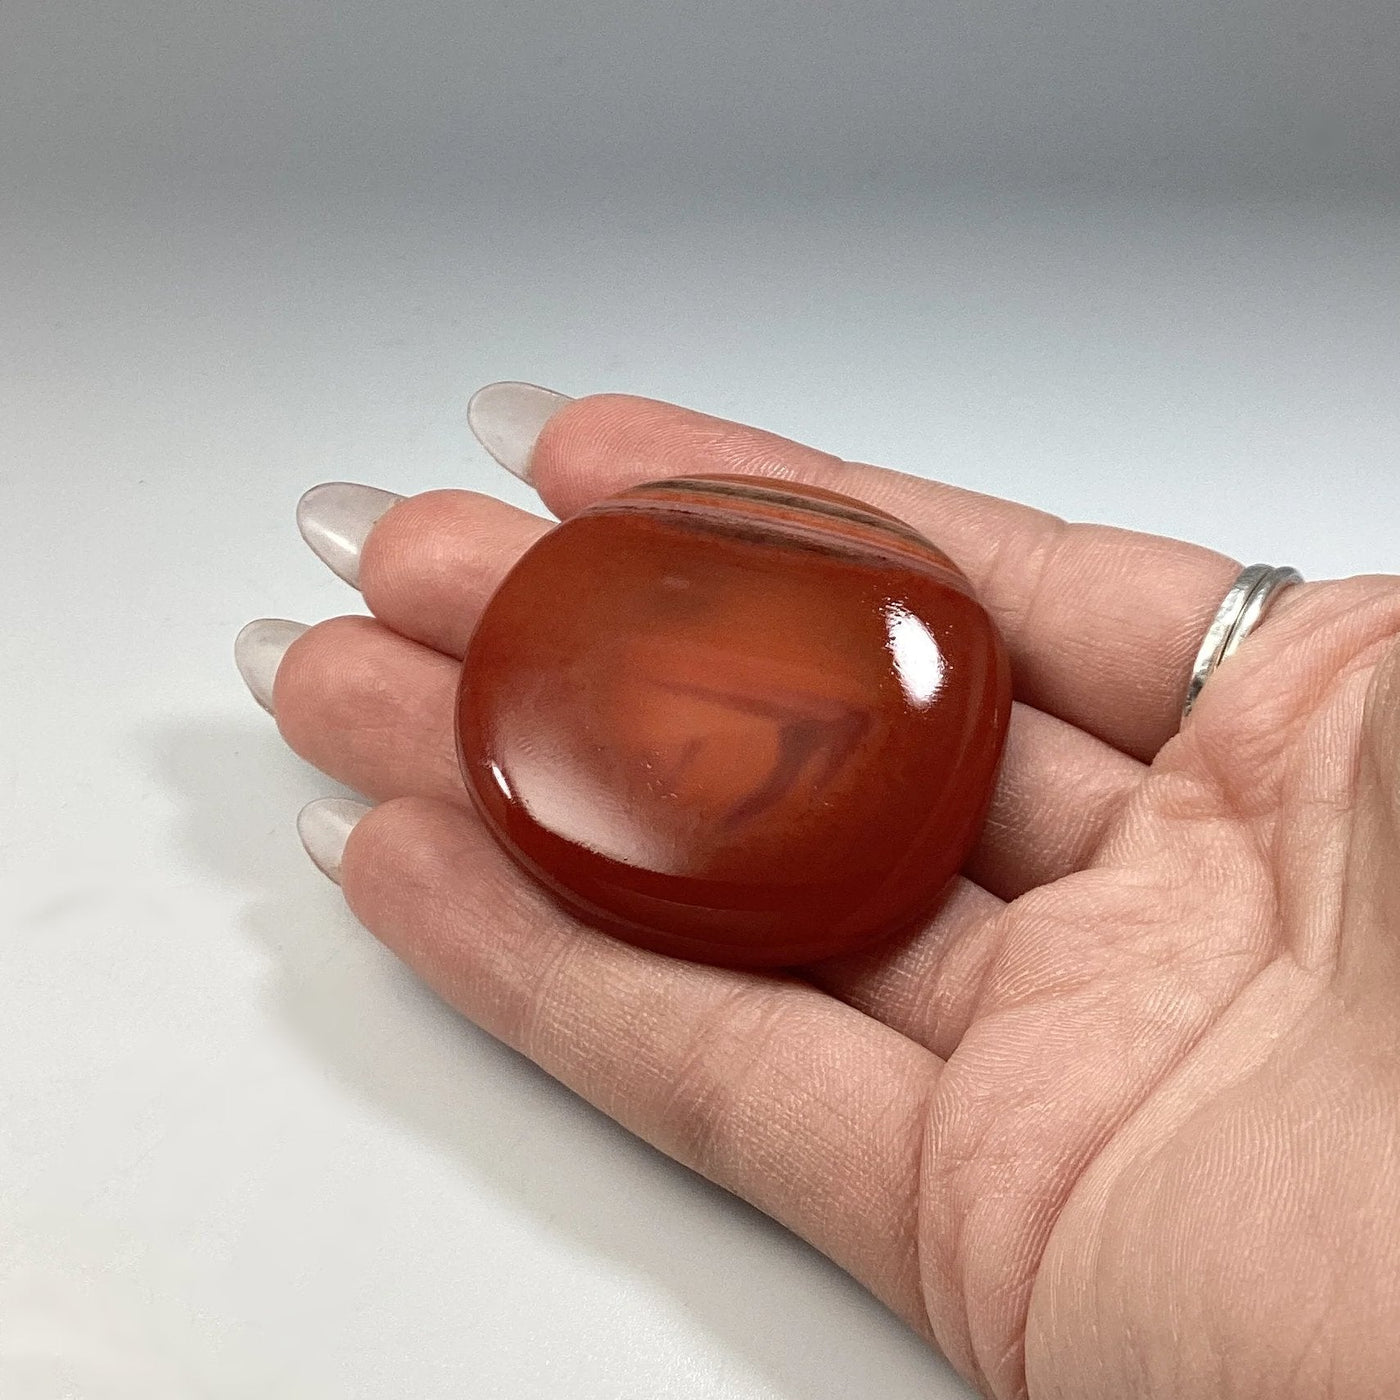 Carnelian Agate Touch Stone